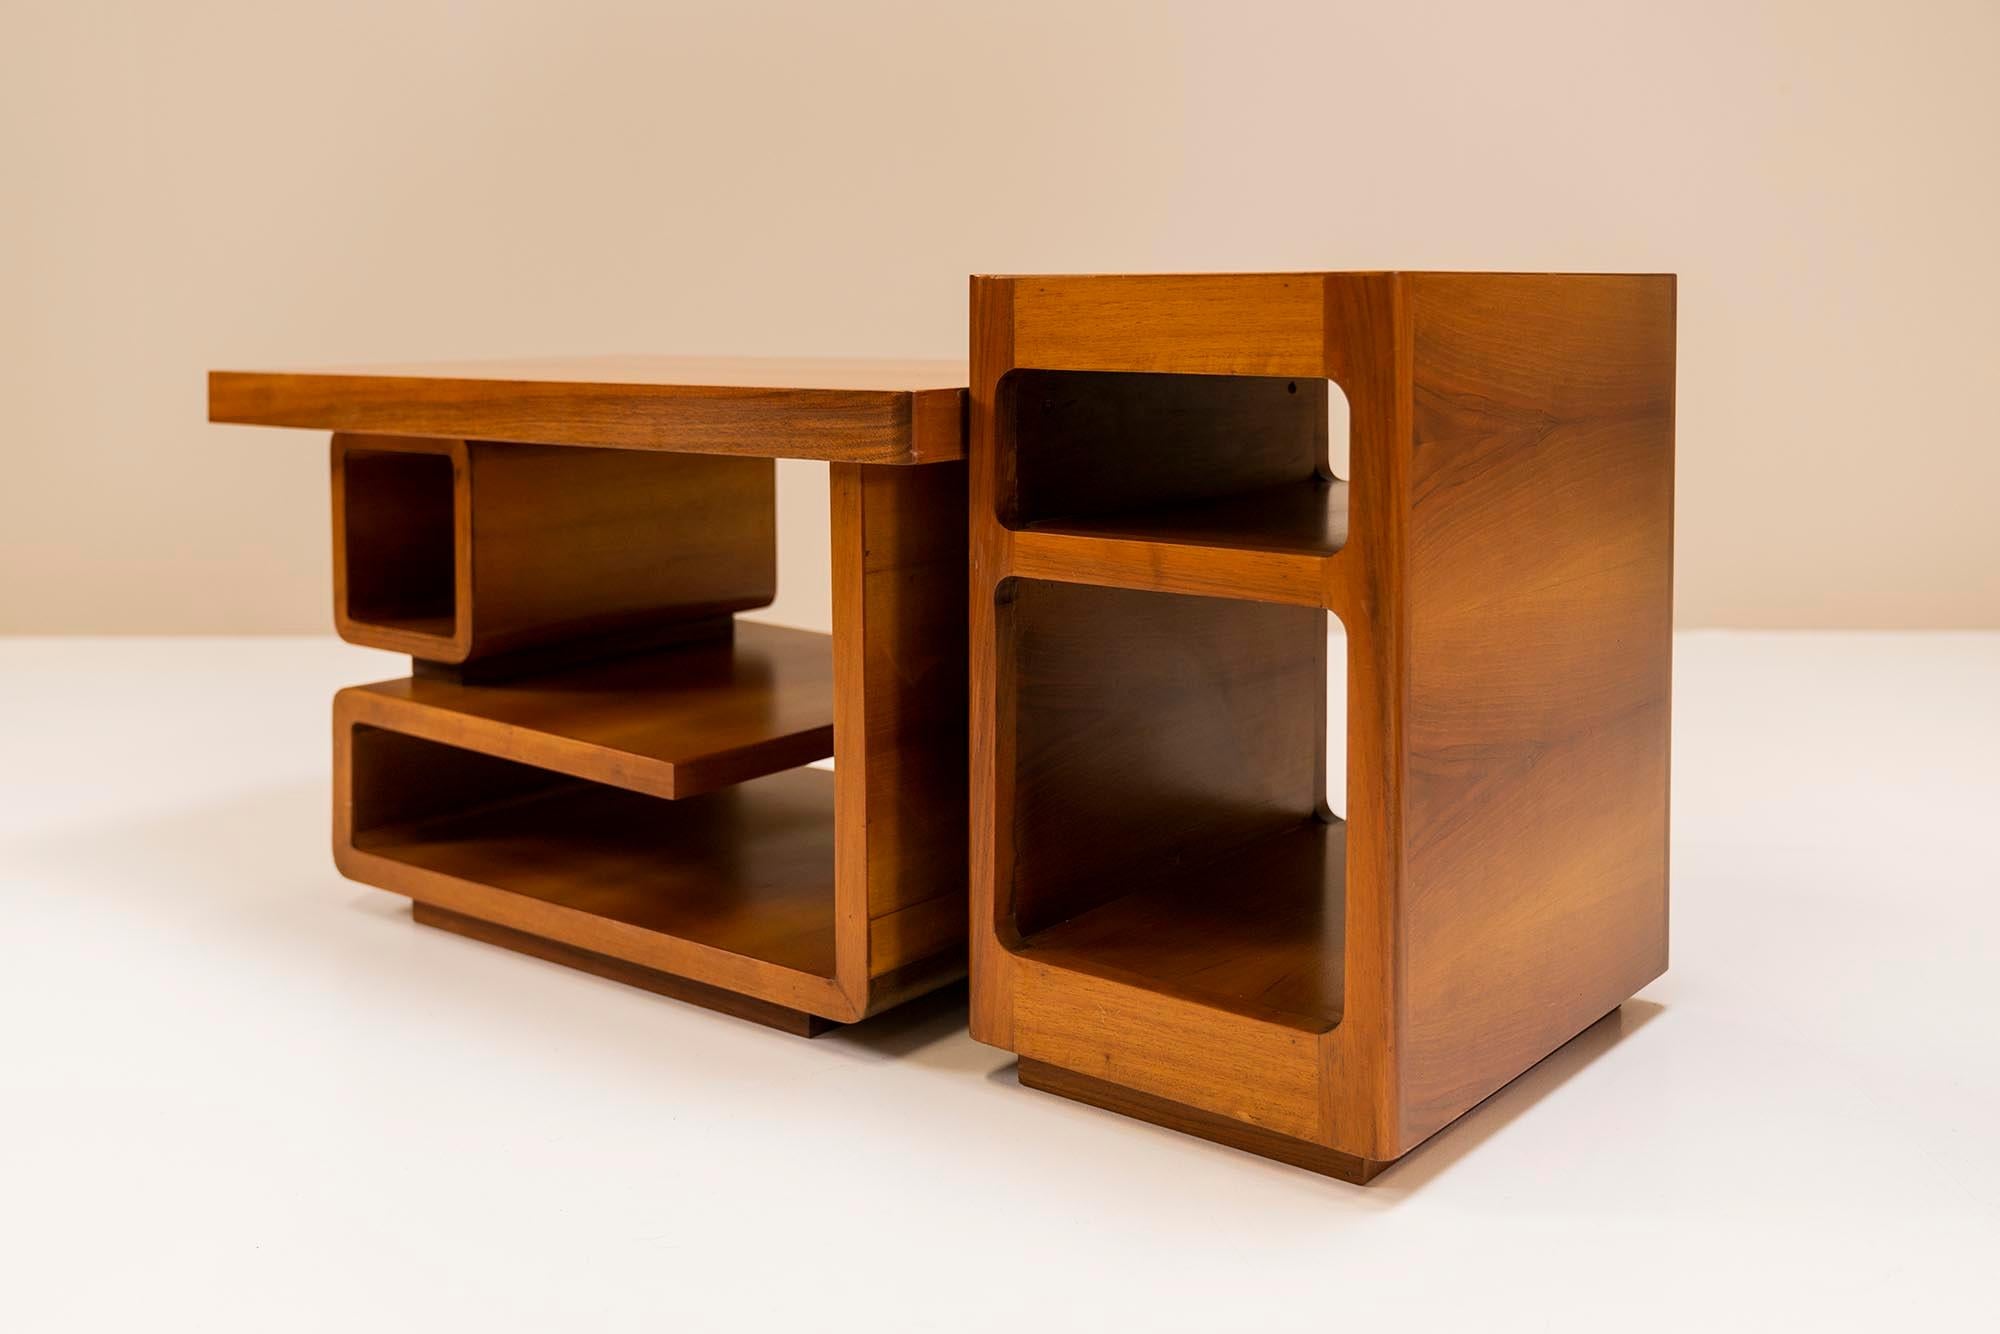 Modernist Showcase Cabinet and Coffee Table in Walnut, Italy, 1960s For Sale 5